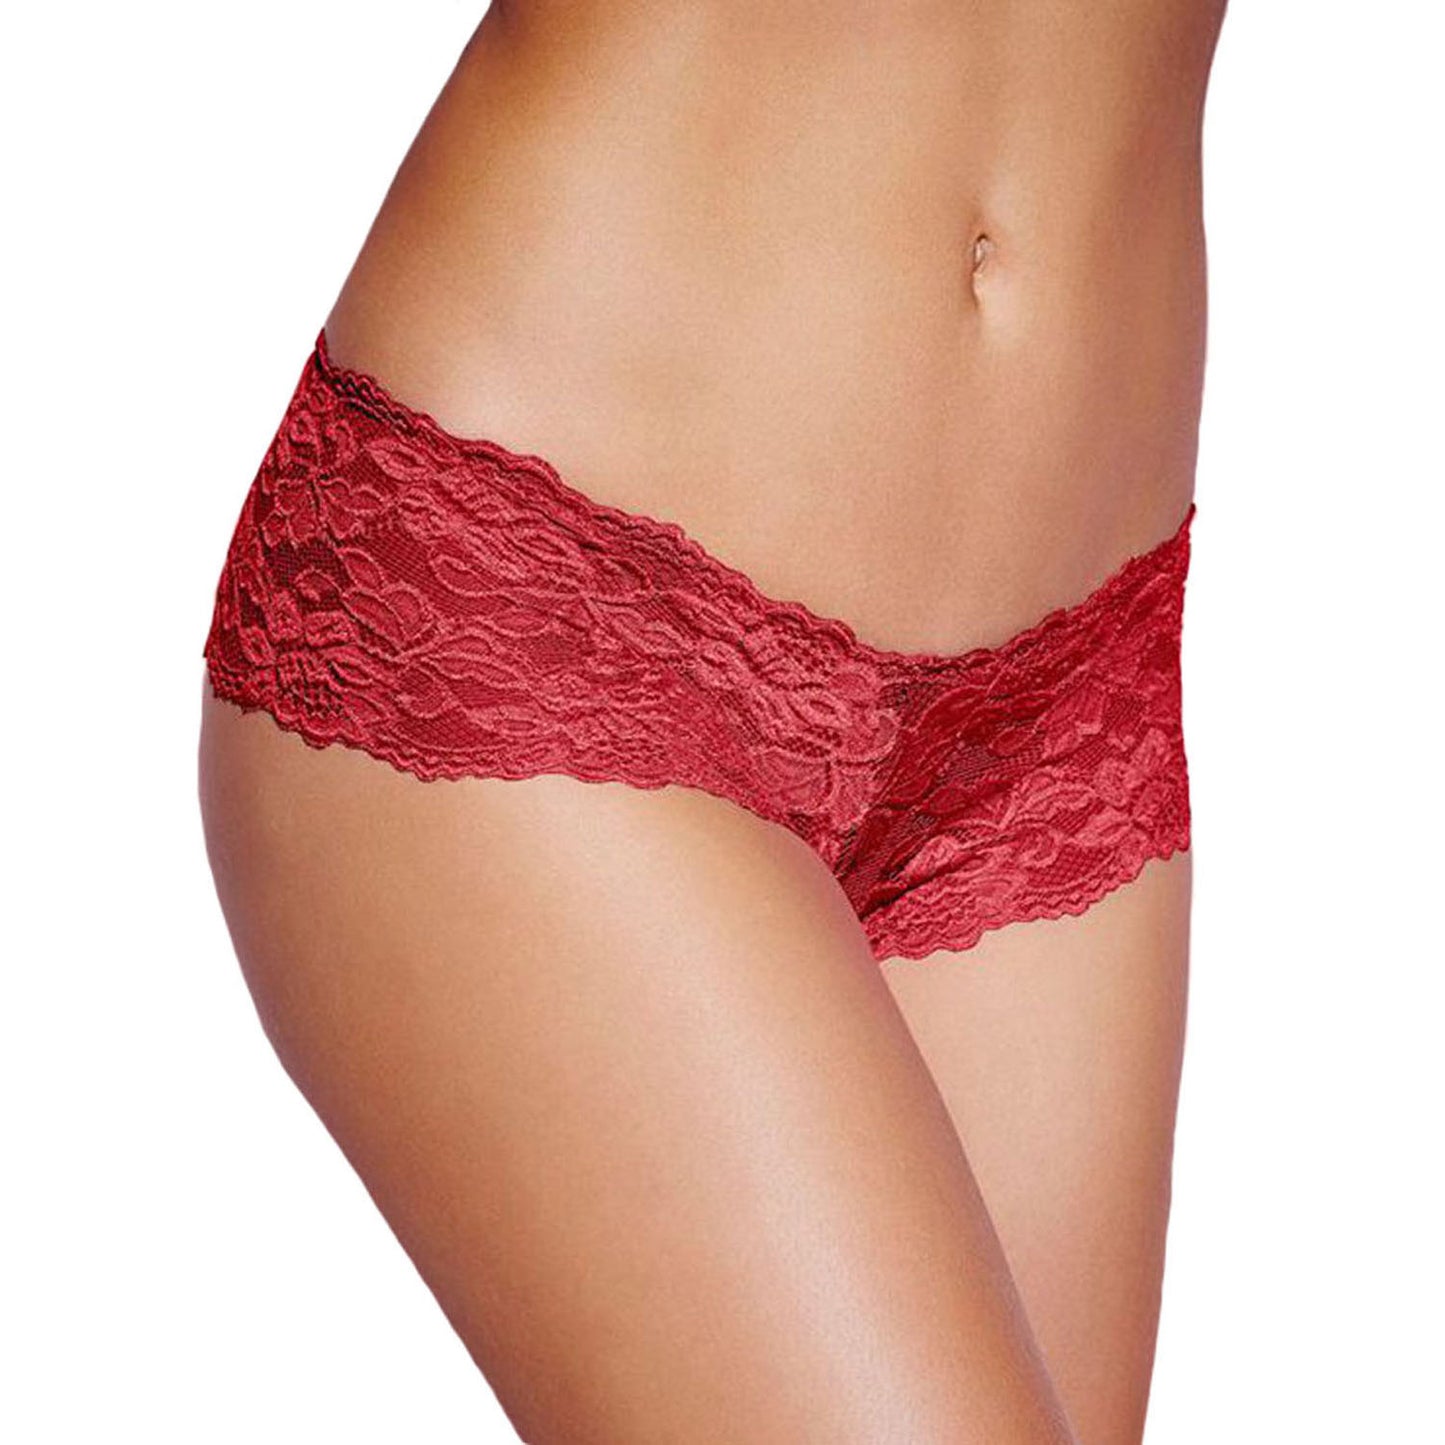 Simply Joshimo Floral Lace French Knickers (Burgundy Red)